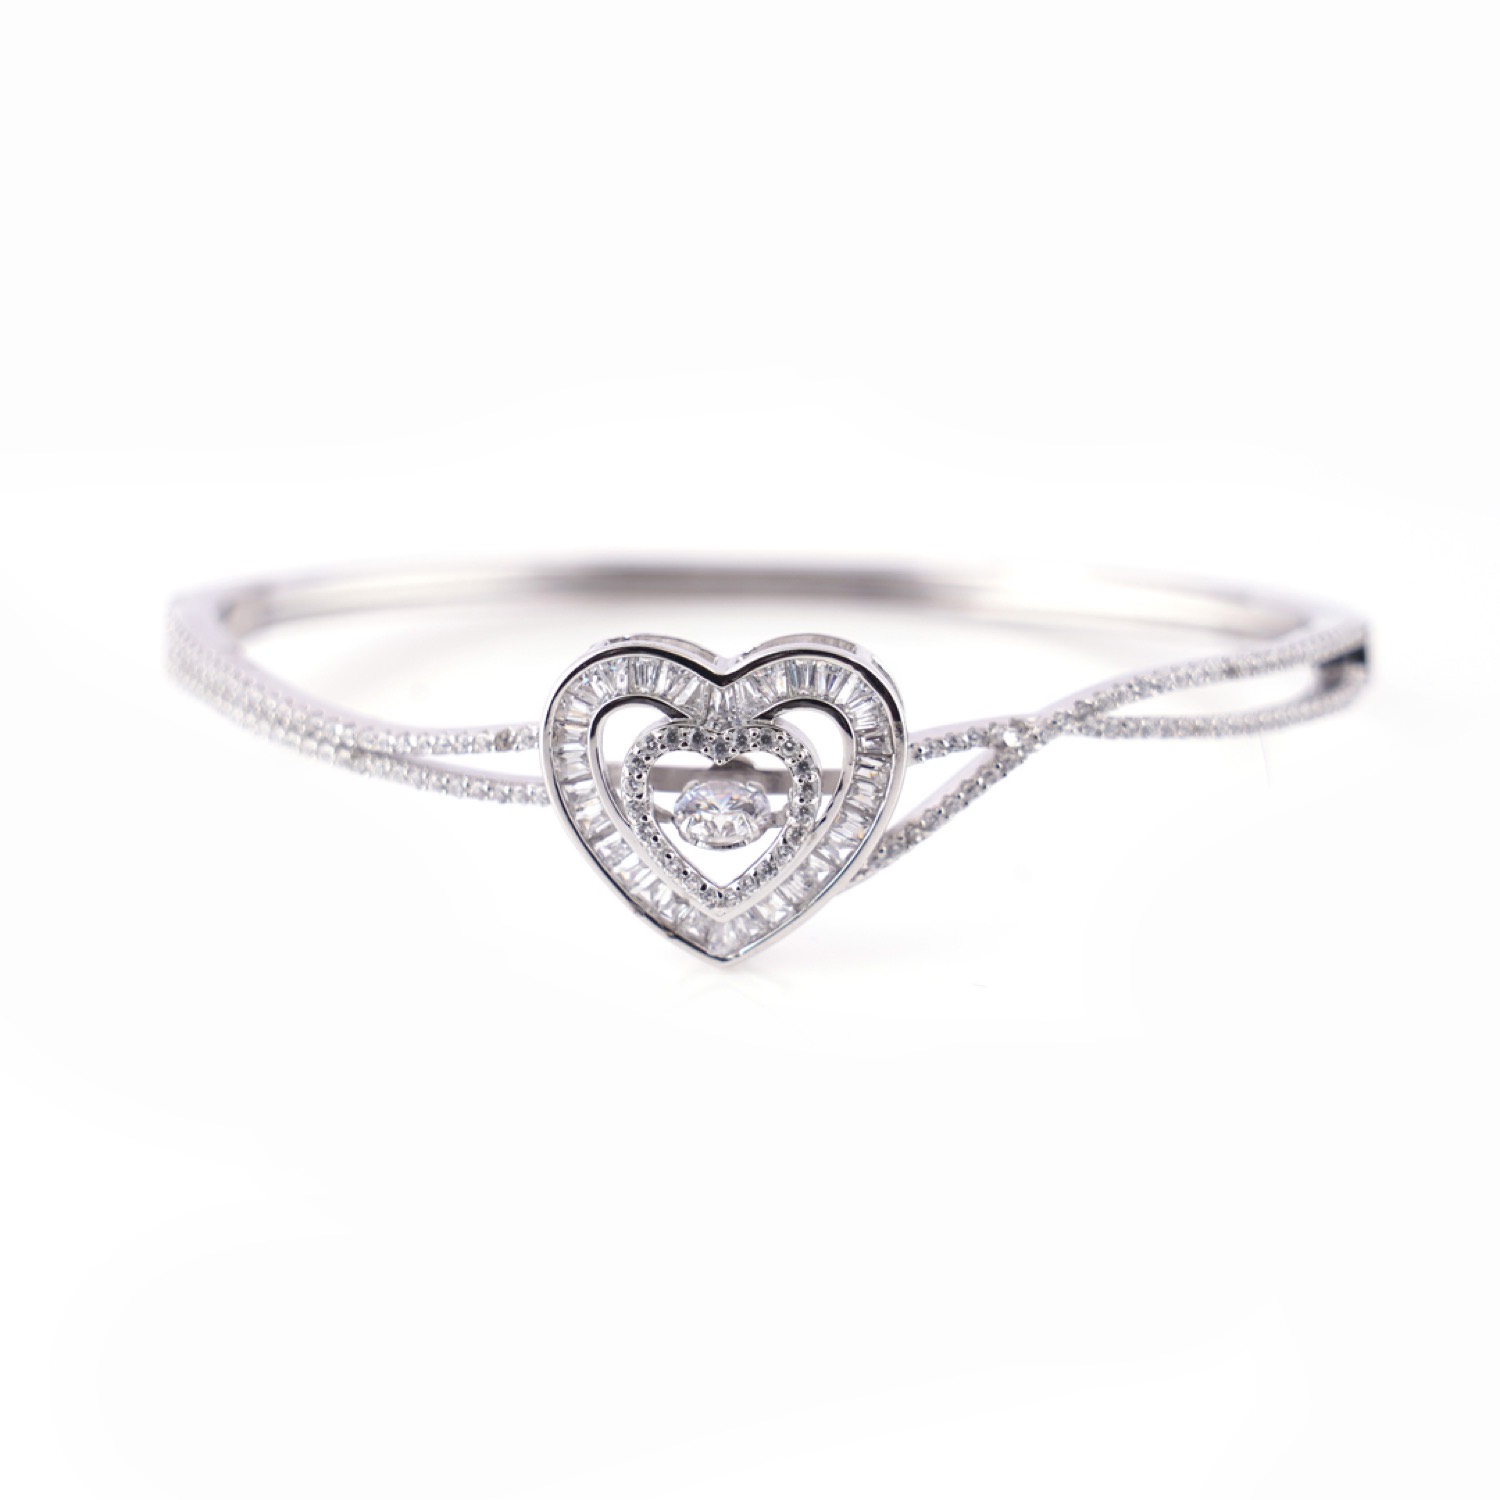 varam_bracelet_and_bangle_tapered_baugette_and_round_cut_white_stone_heart_shaped_open_type_silver_bracelet-1